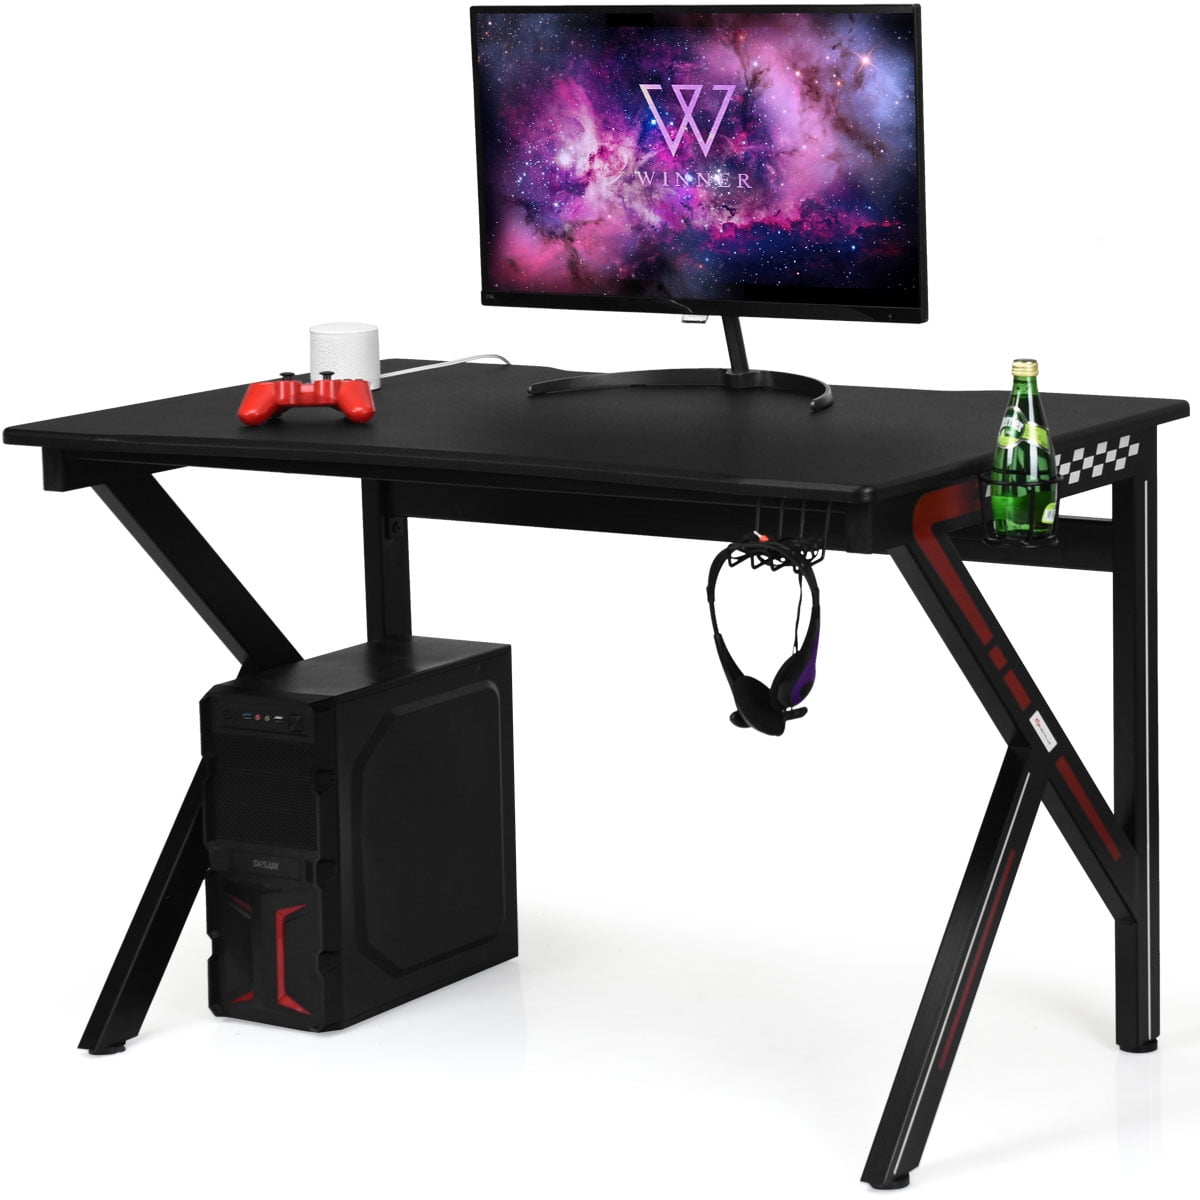 Racing Style Student Table Gamer Station Home Office PC Computer Desk with Cup Holder & Headphone Hook AuAg 47 inch Gaming Desk with RGB Lights